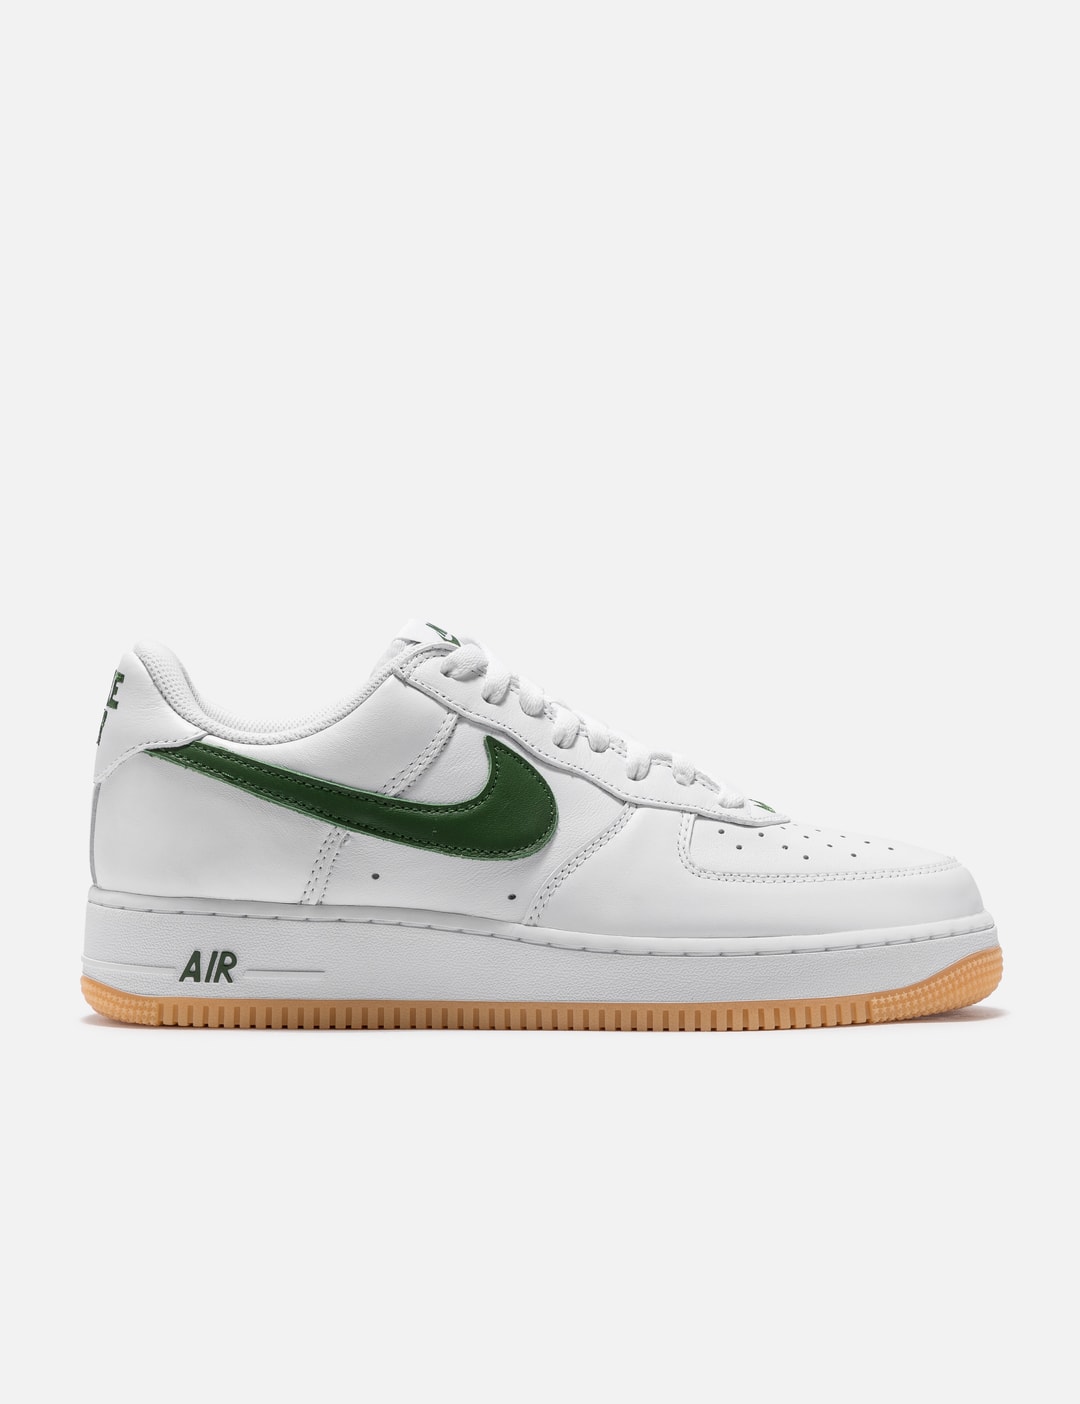 MoreSneakers.com on X: Nike Air Force 1 '07 LV8 Just Do It 'Team